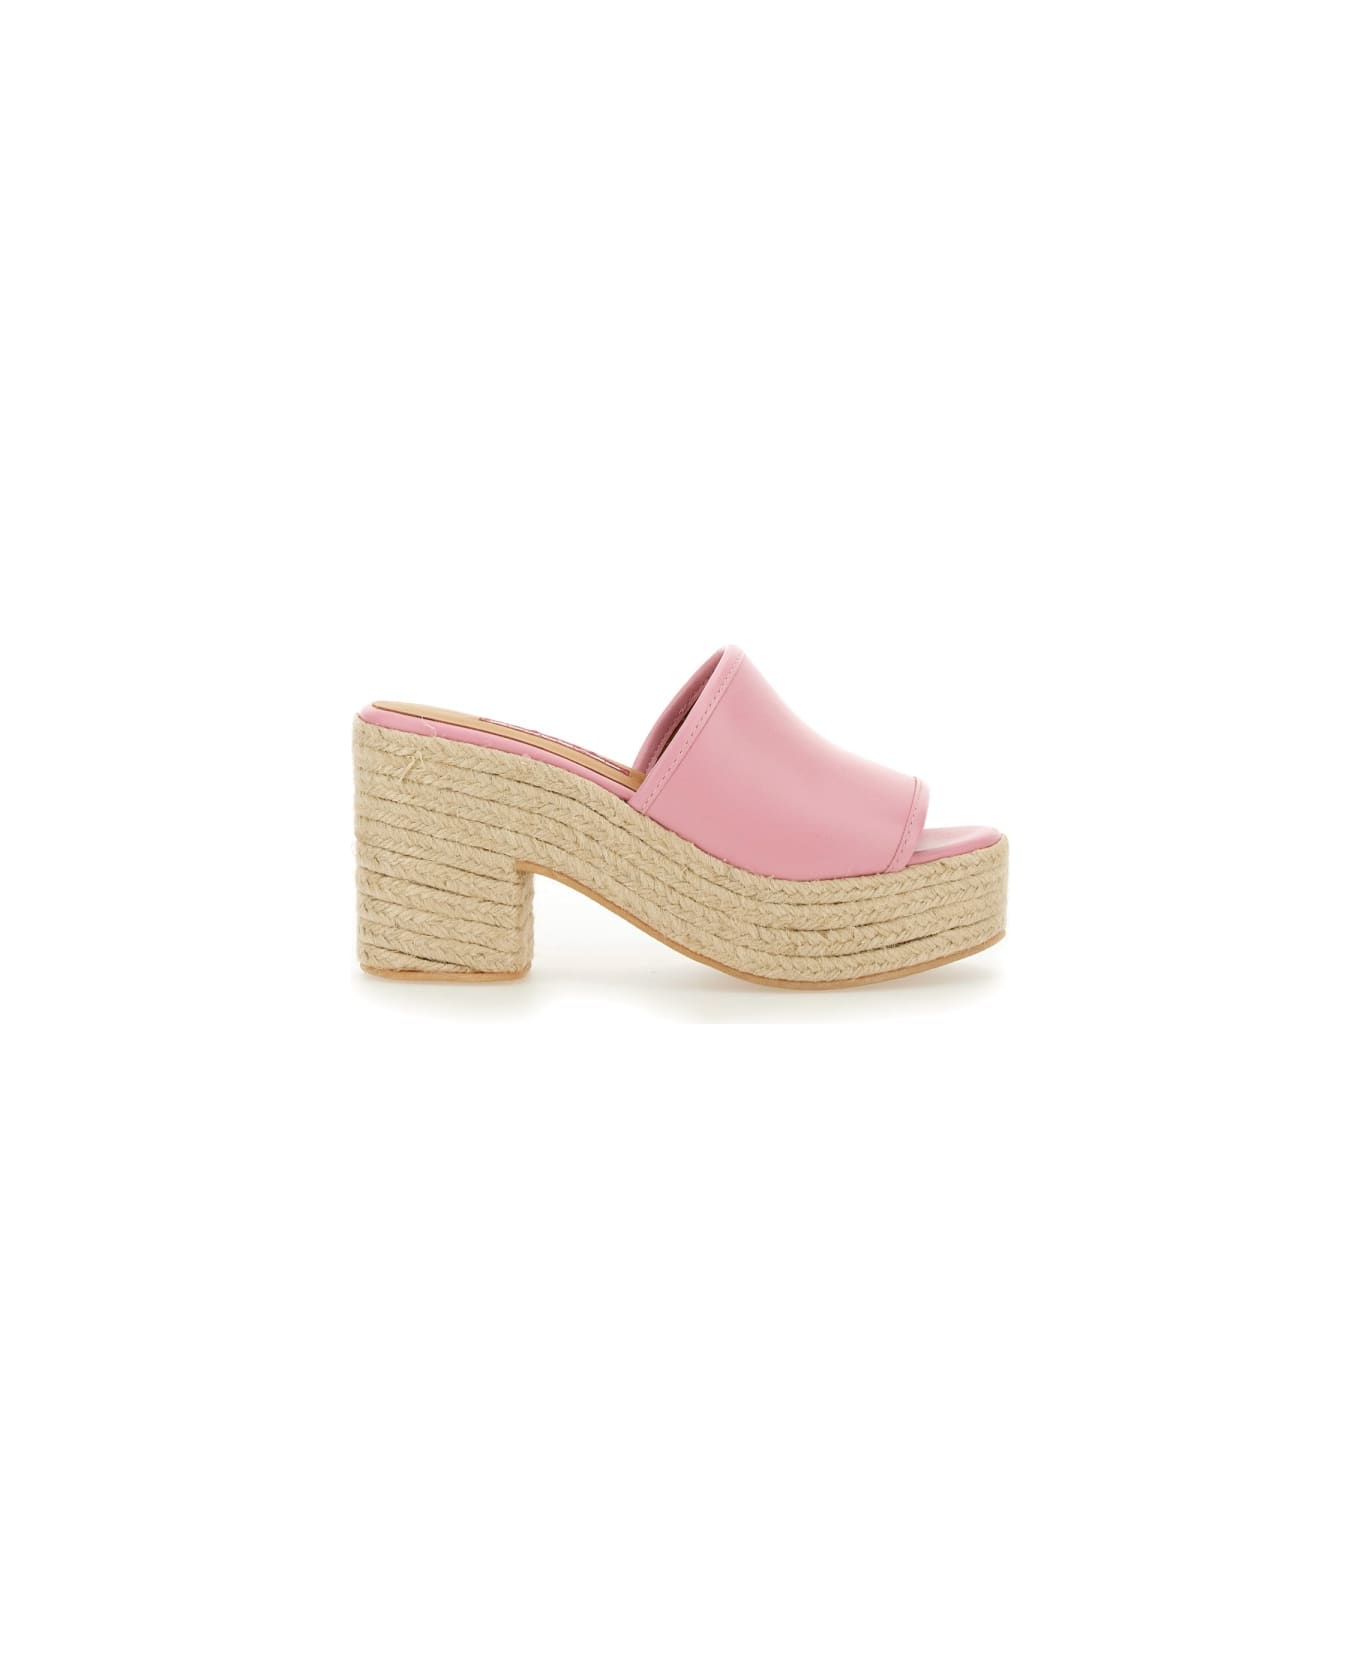 M05CH1N0 Jeans Leather Sandal - PINK